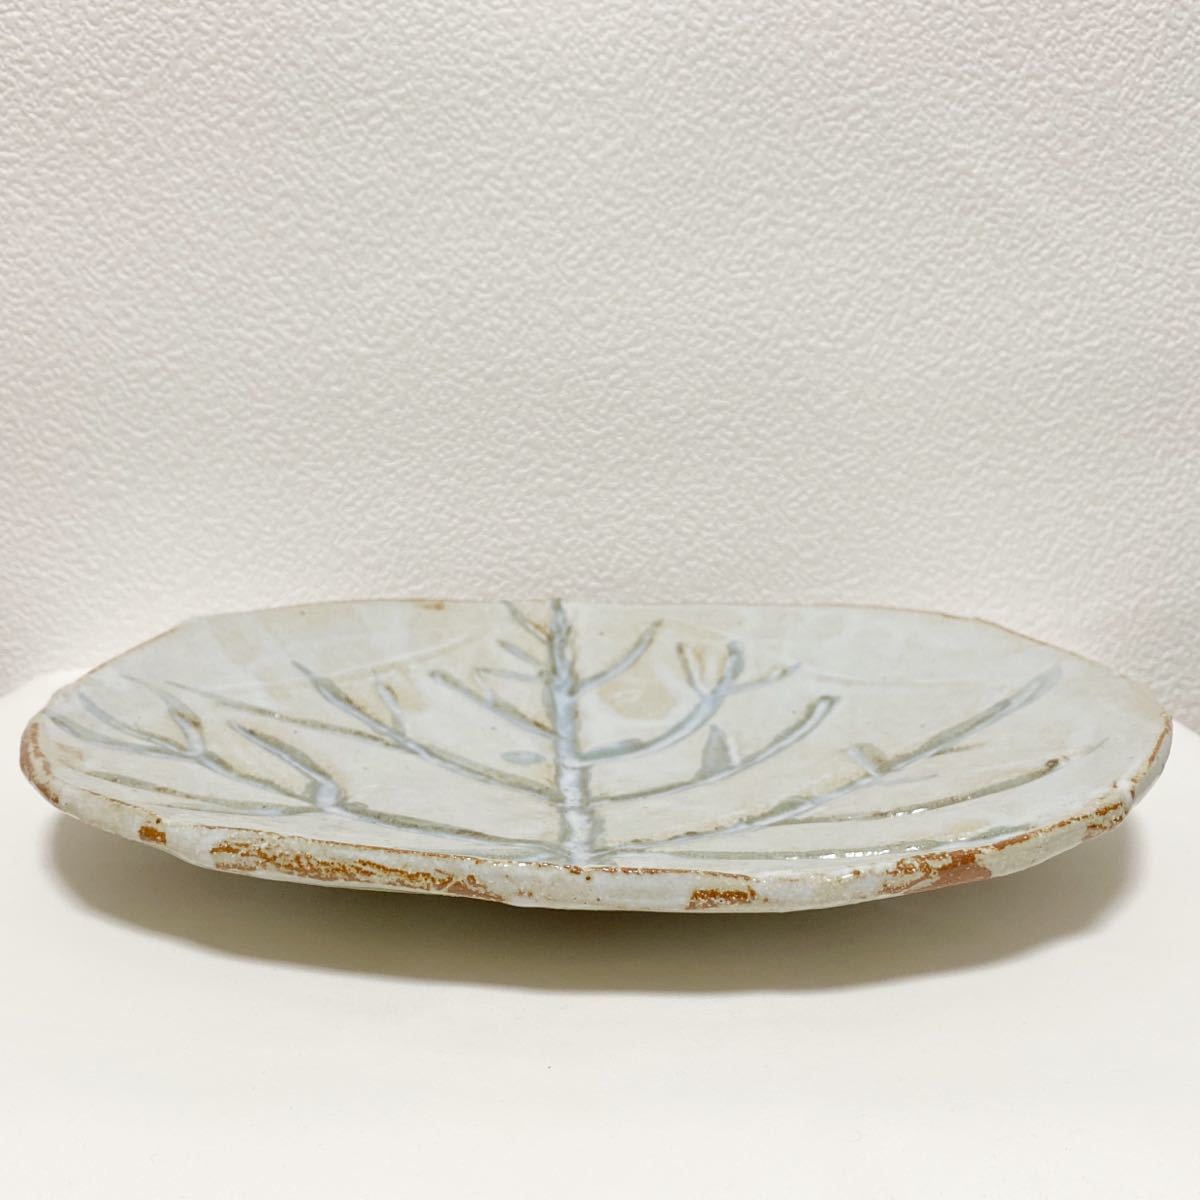 [ hand made one point thing!] unused goods roasting thing flat plate large plate white tree. leaf pattern interior. decoration .! beige handmade thickness .